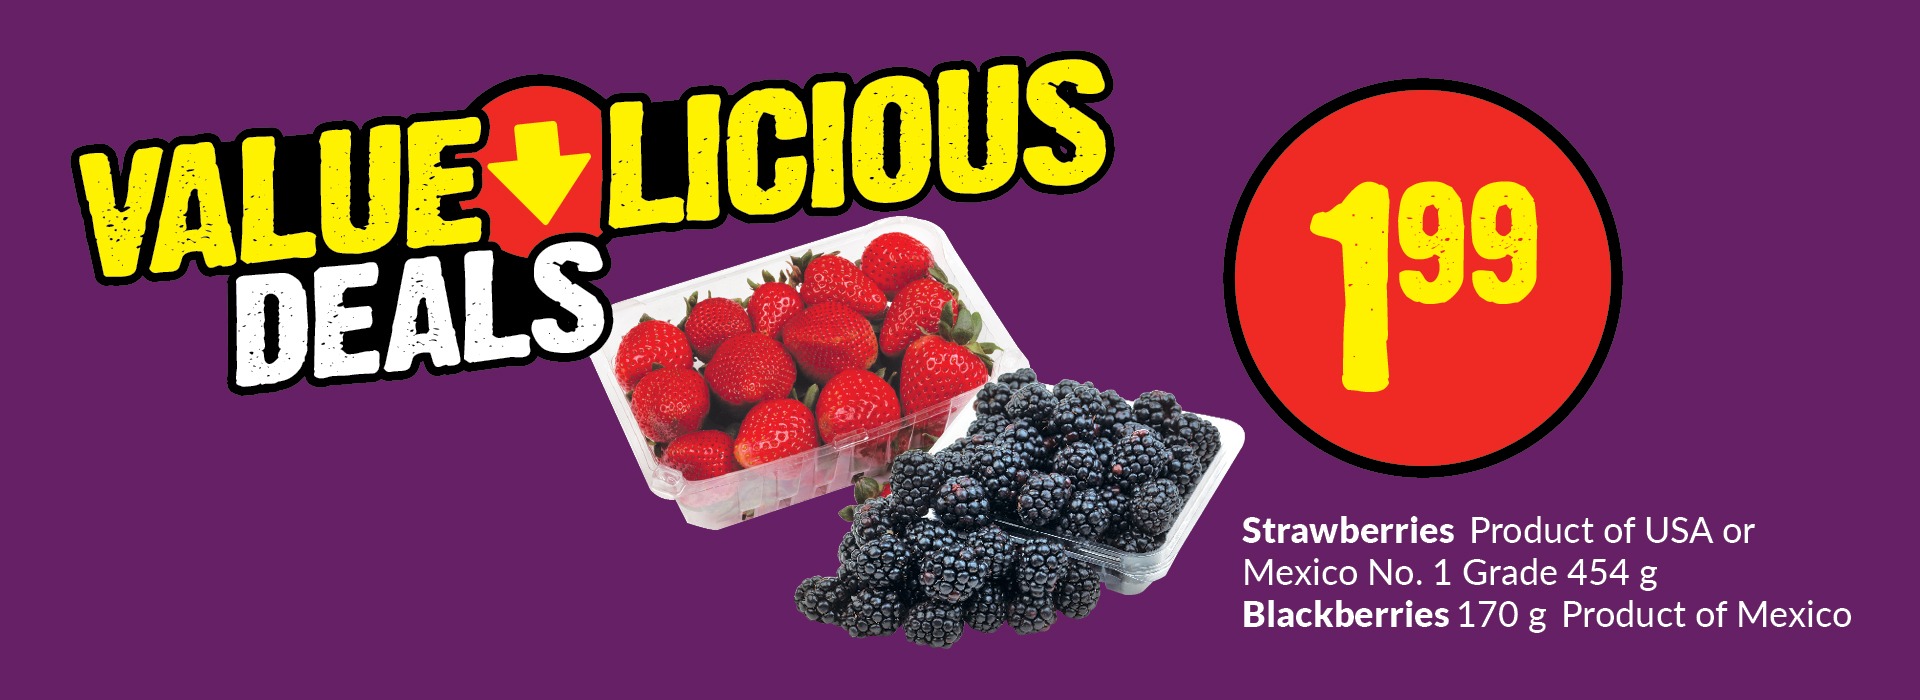 The following image consists of the text, "Value Licious Deals, Strawberries Product of USA or Mexico No.1 Grade 454g Blackberries 170g, Product of Mexico."